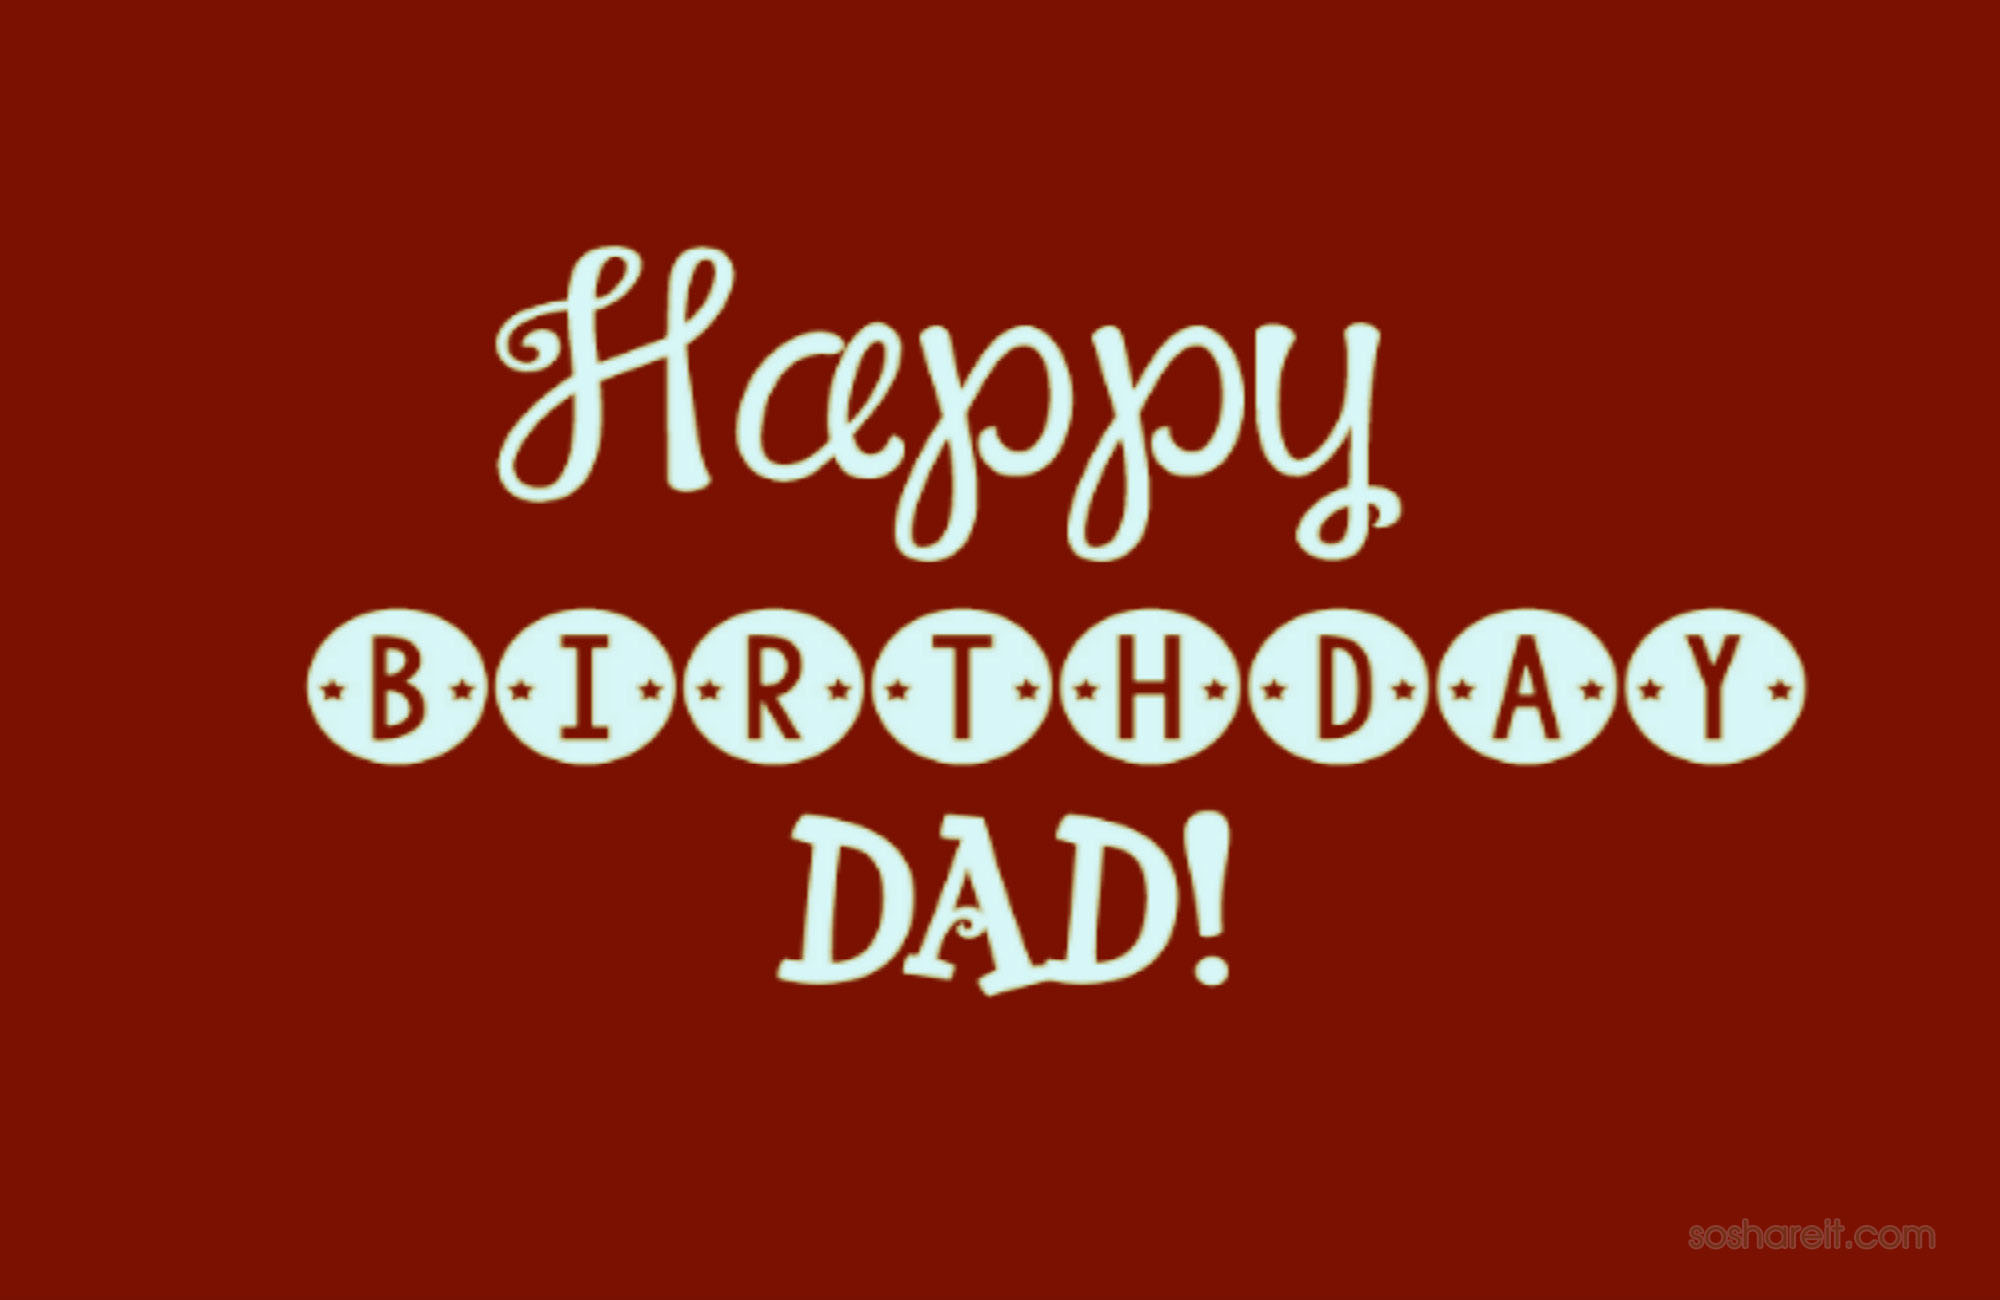 Birthday Wishes For Dad 76 Happy Birthday Father Wishes Or Send